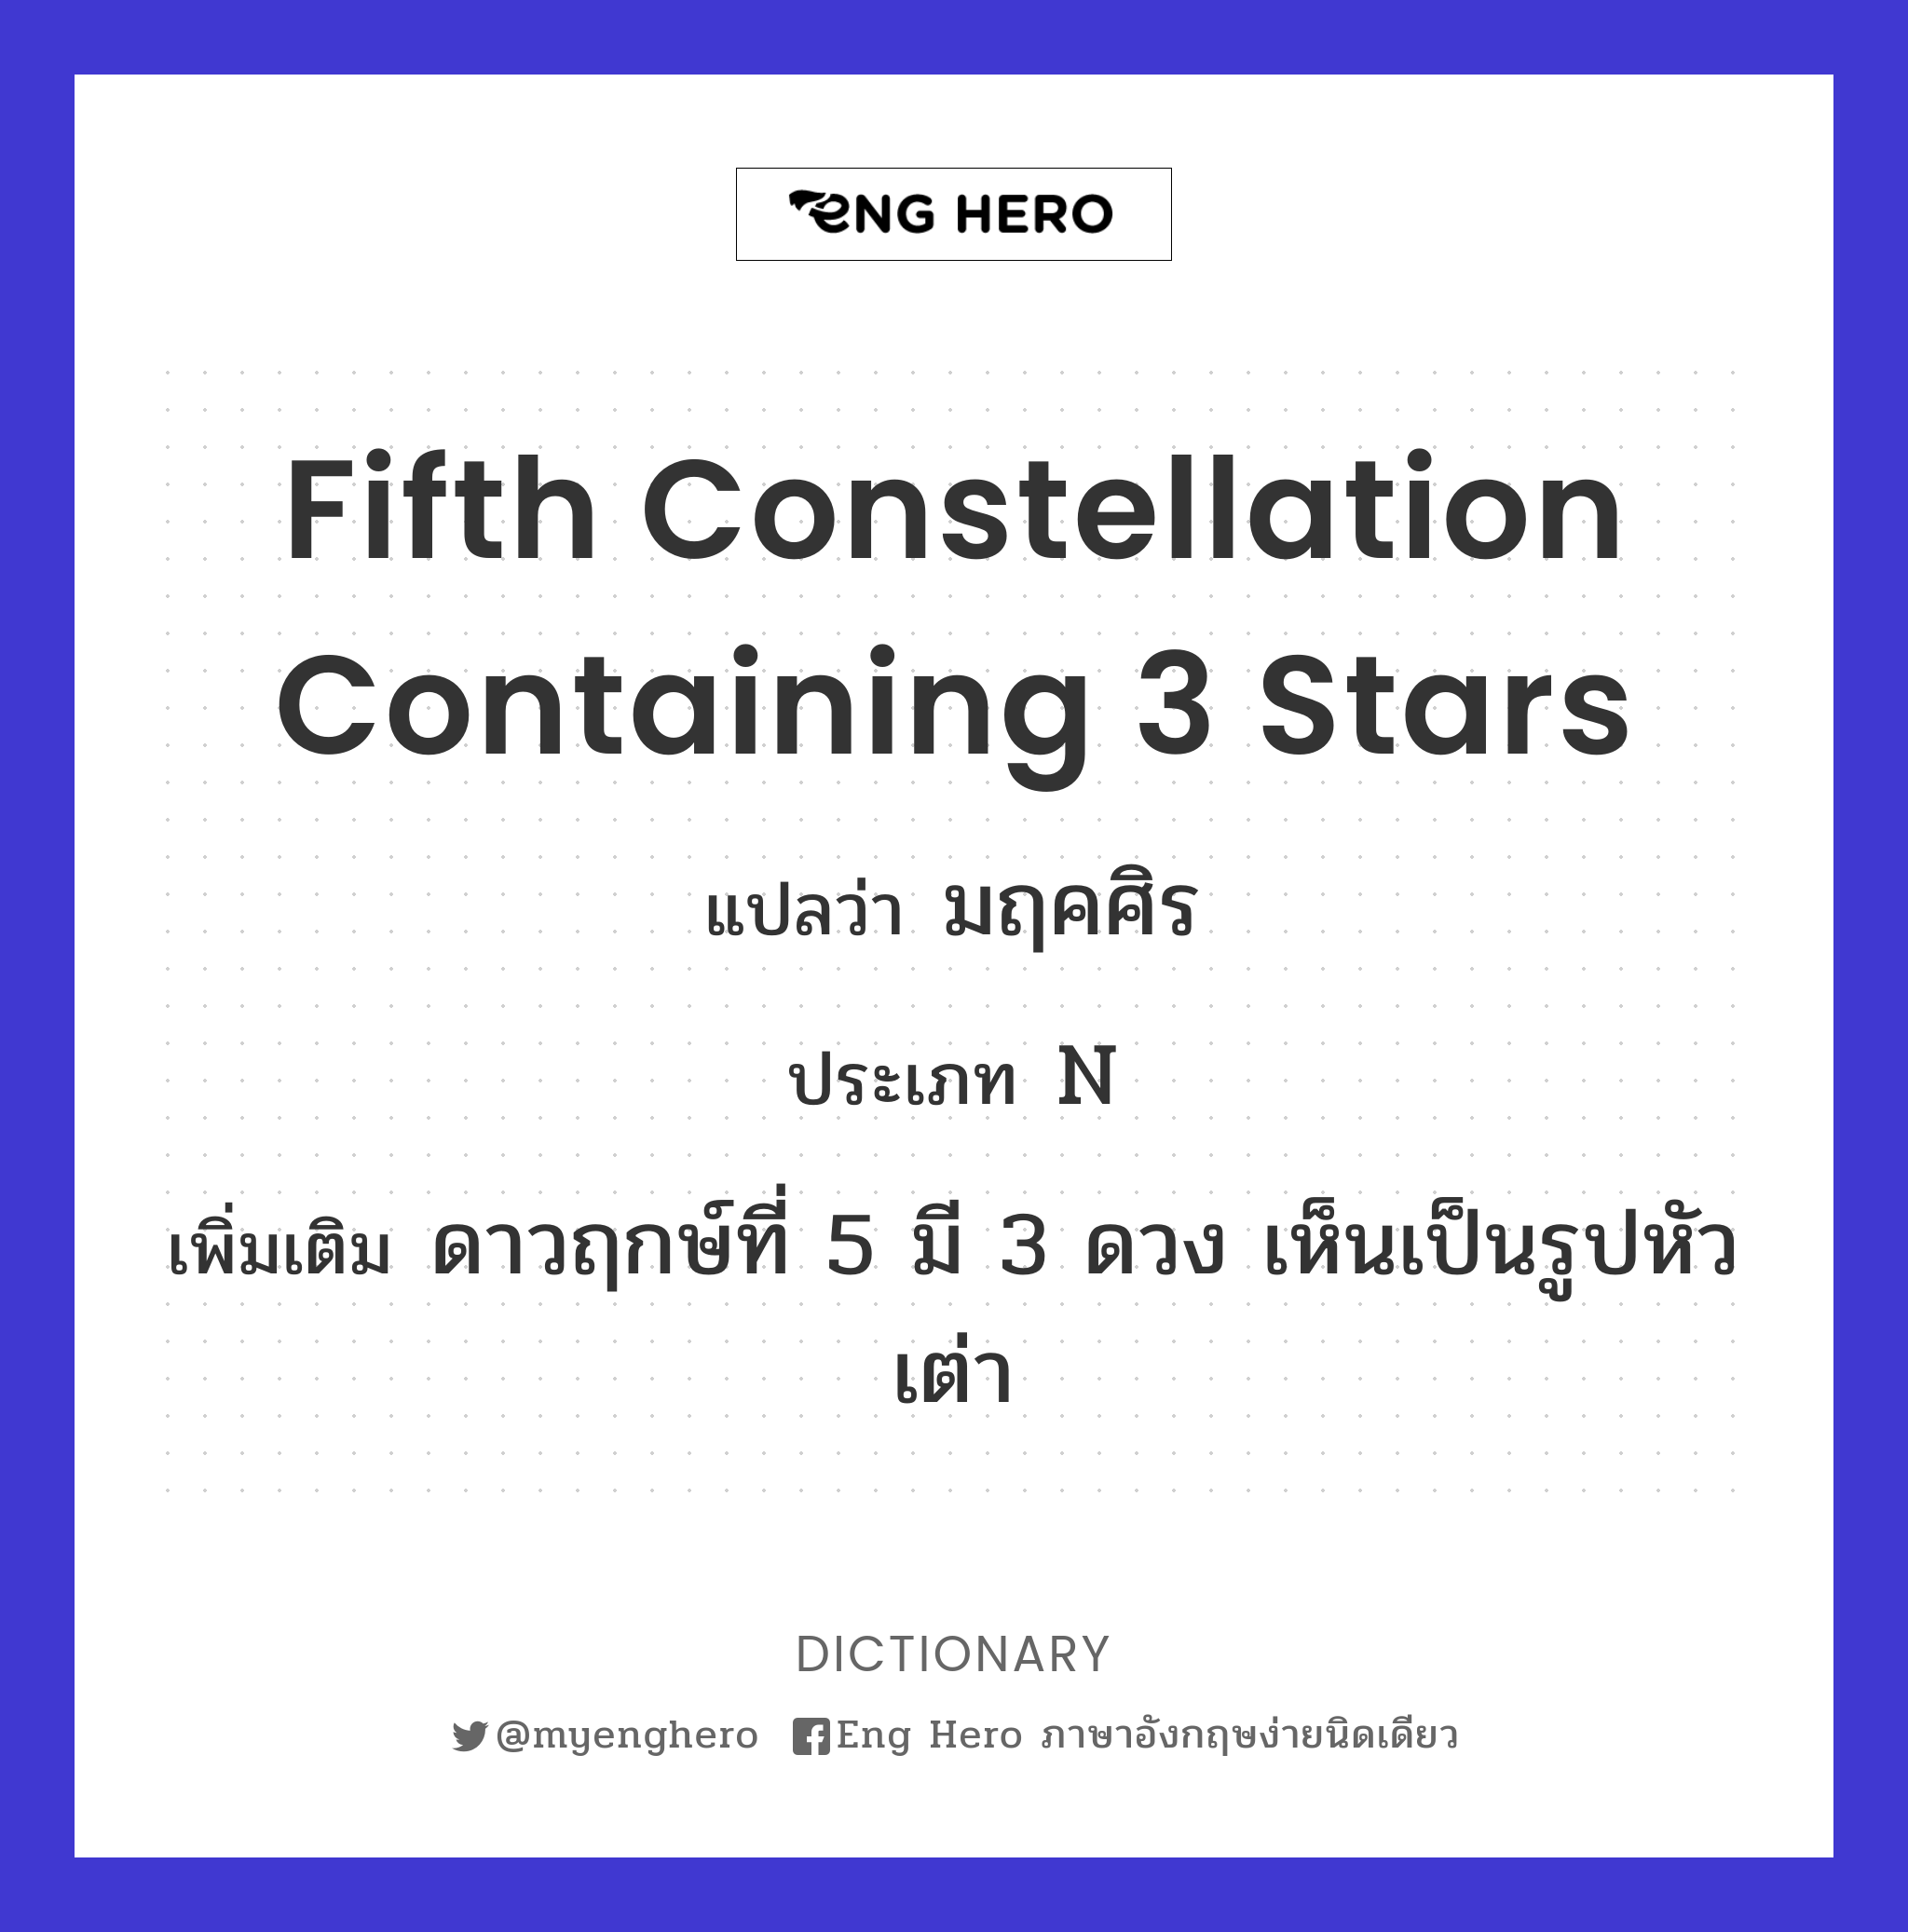 fifth constellation containing 3 stars